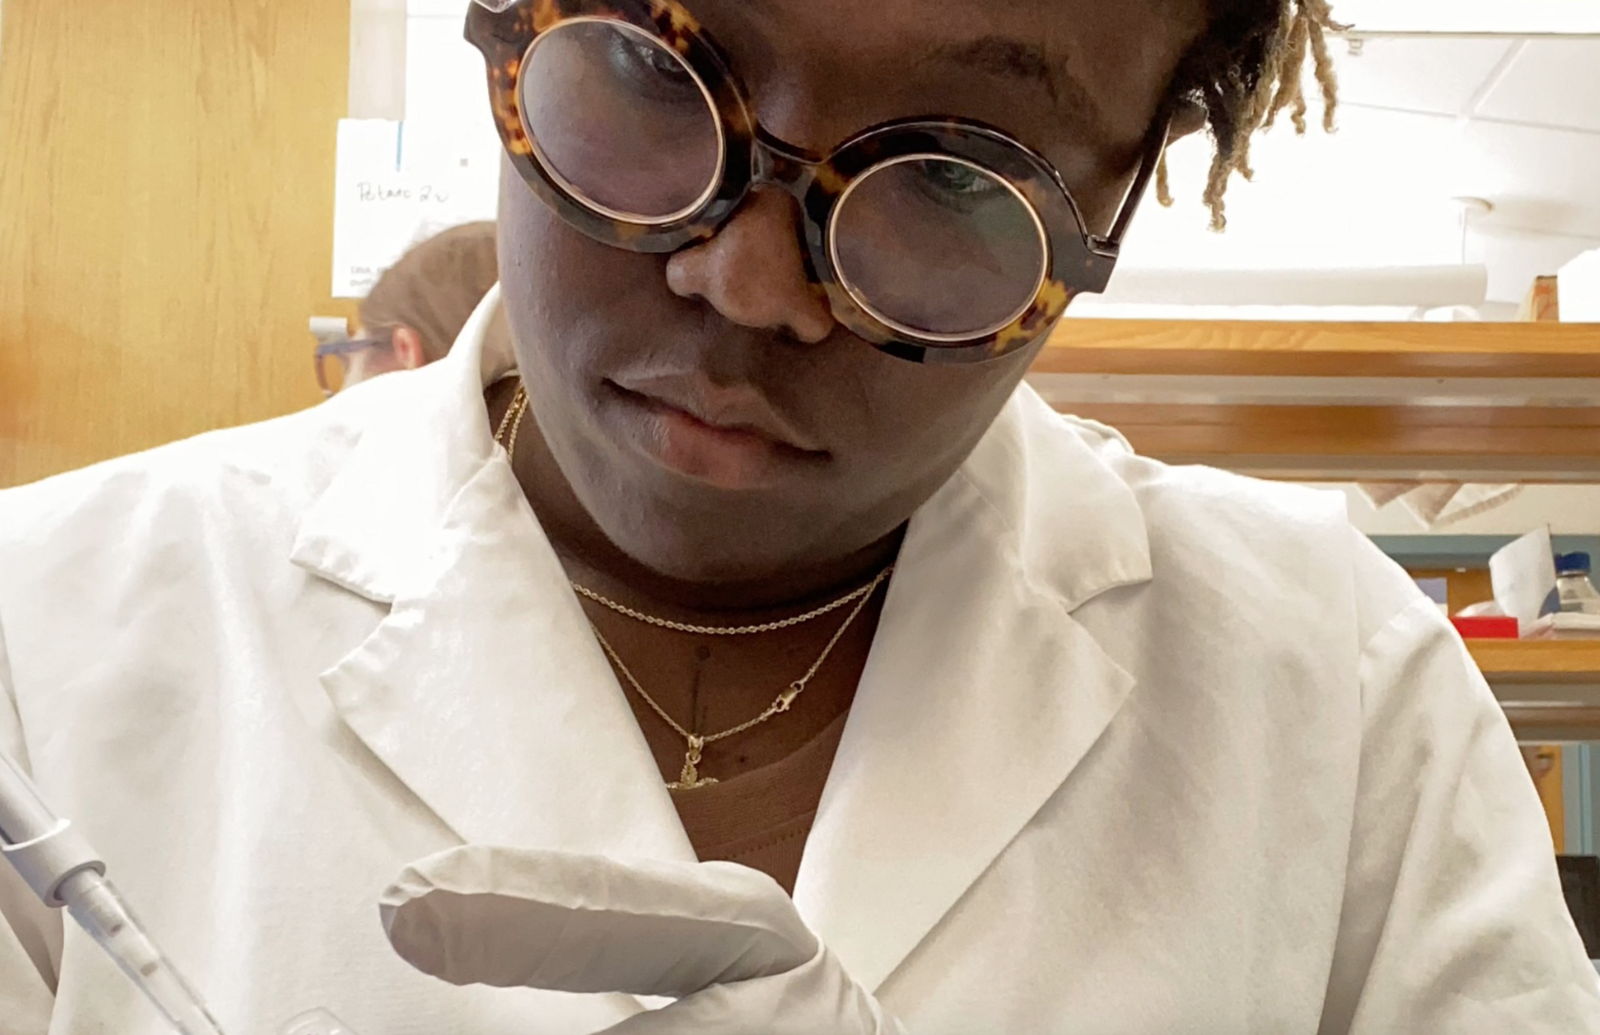 Fort Valley State University student Audree Garrett conducts an experiment in the lab of GRA Eminent Scholar Robin Buell at UGA. Garrett introduced viruses into tomato plants to generate more terpenes, a chemical that holds promise for new medicines and products that benefit people.